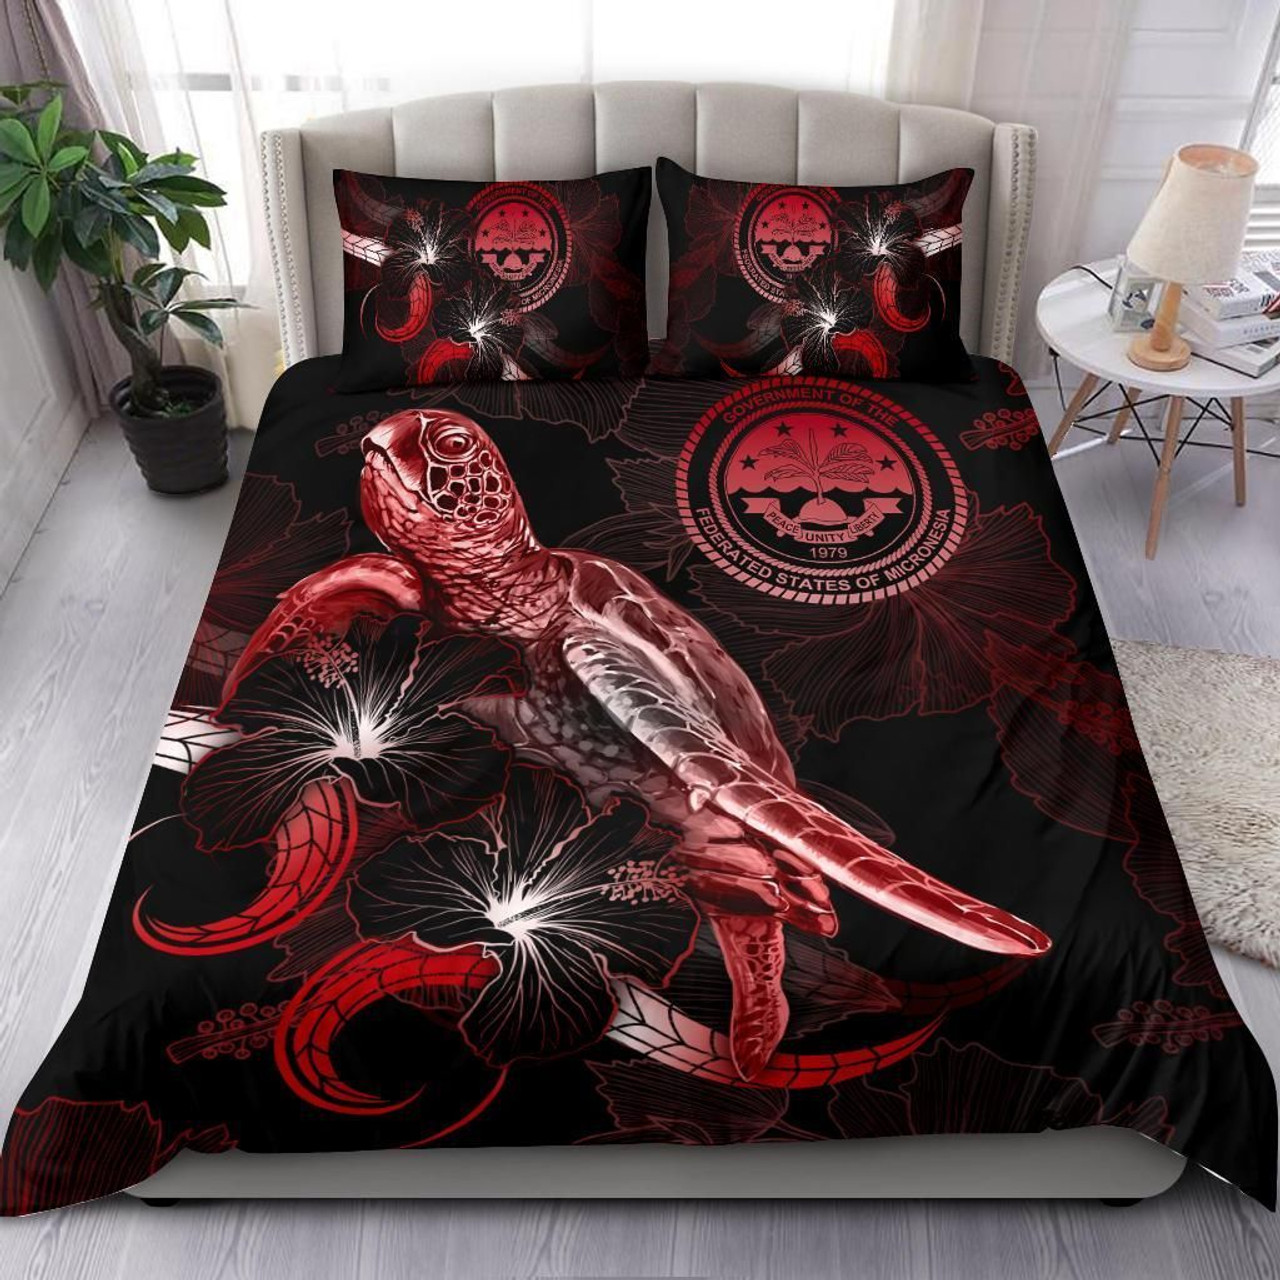 Federated States Of Micronesia Polynesian Bedding Set - Turtle With Blooming Hibiscus Red 1